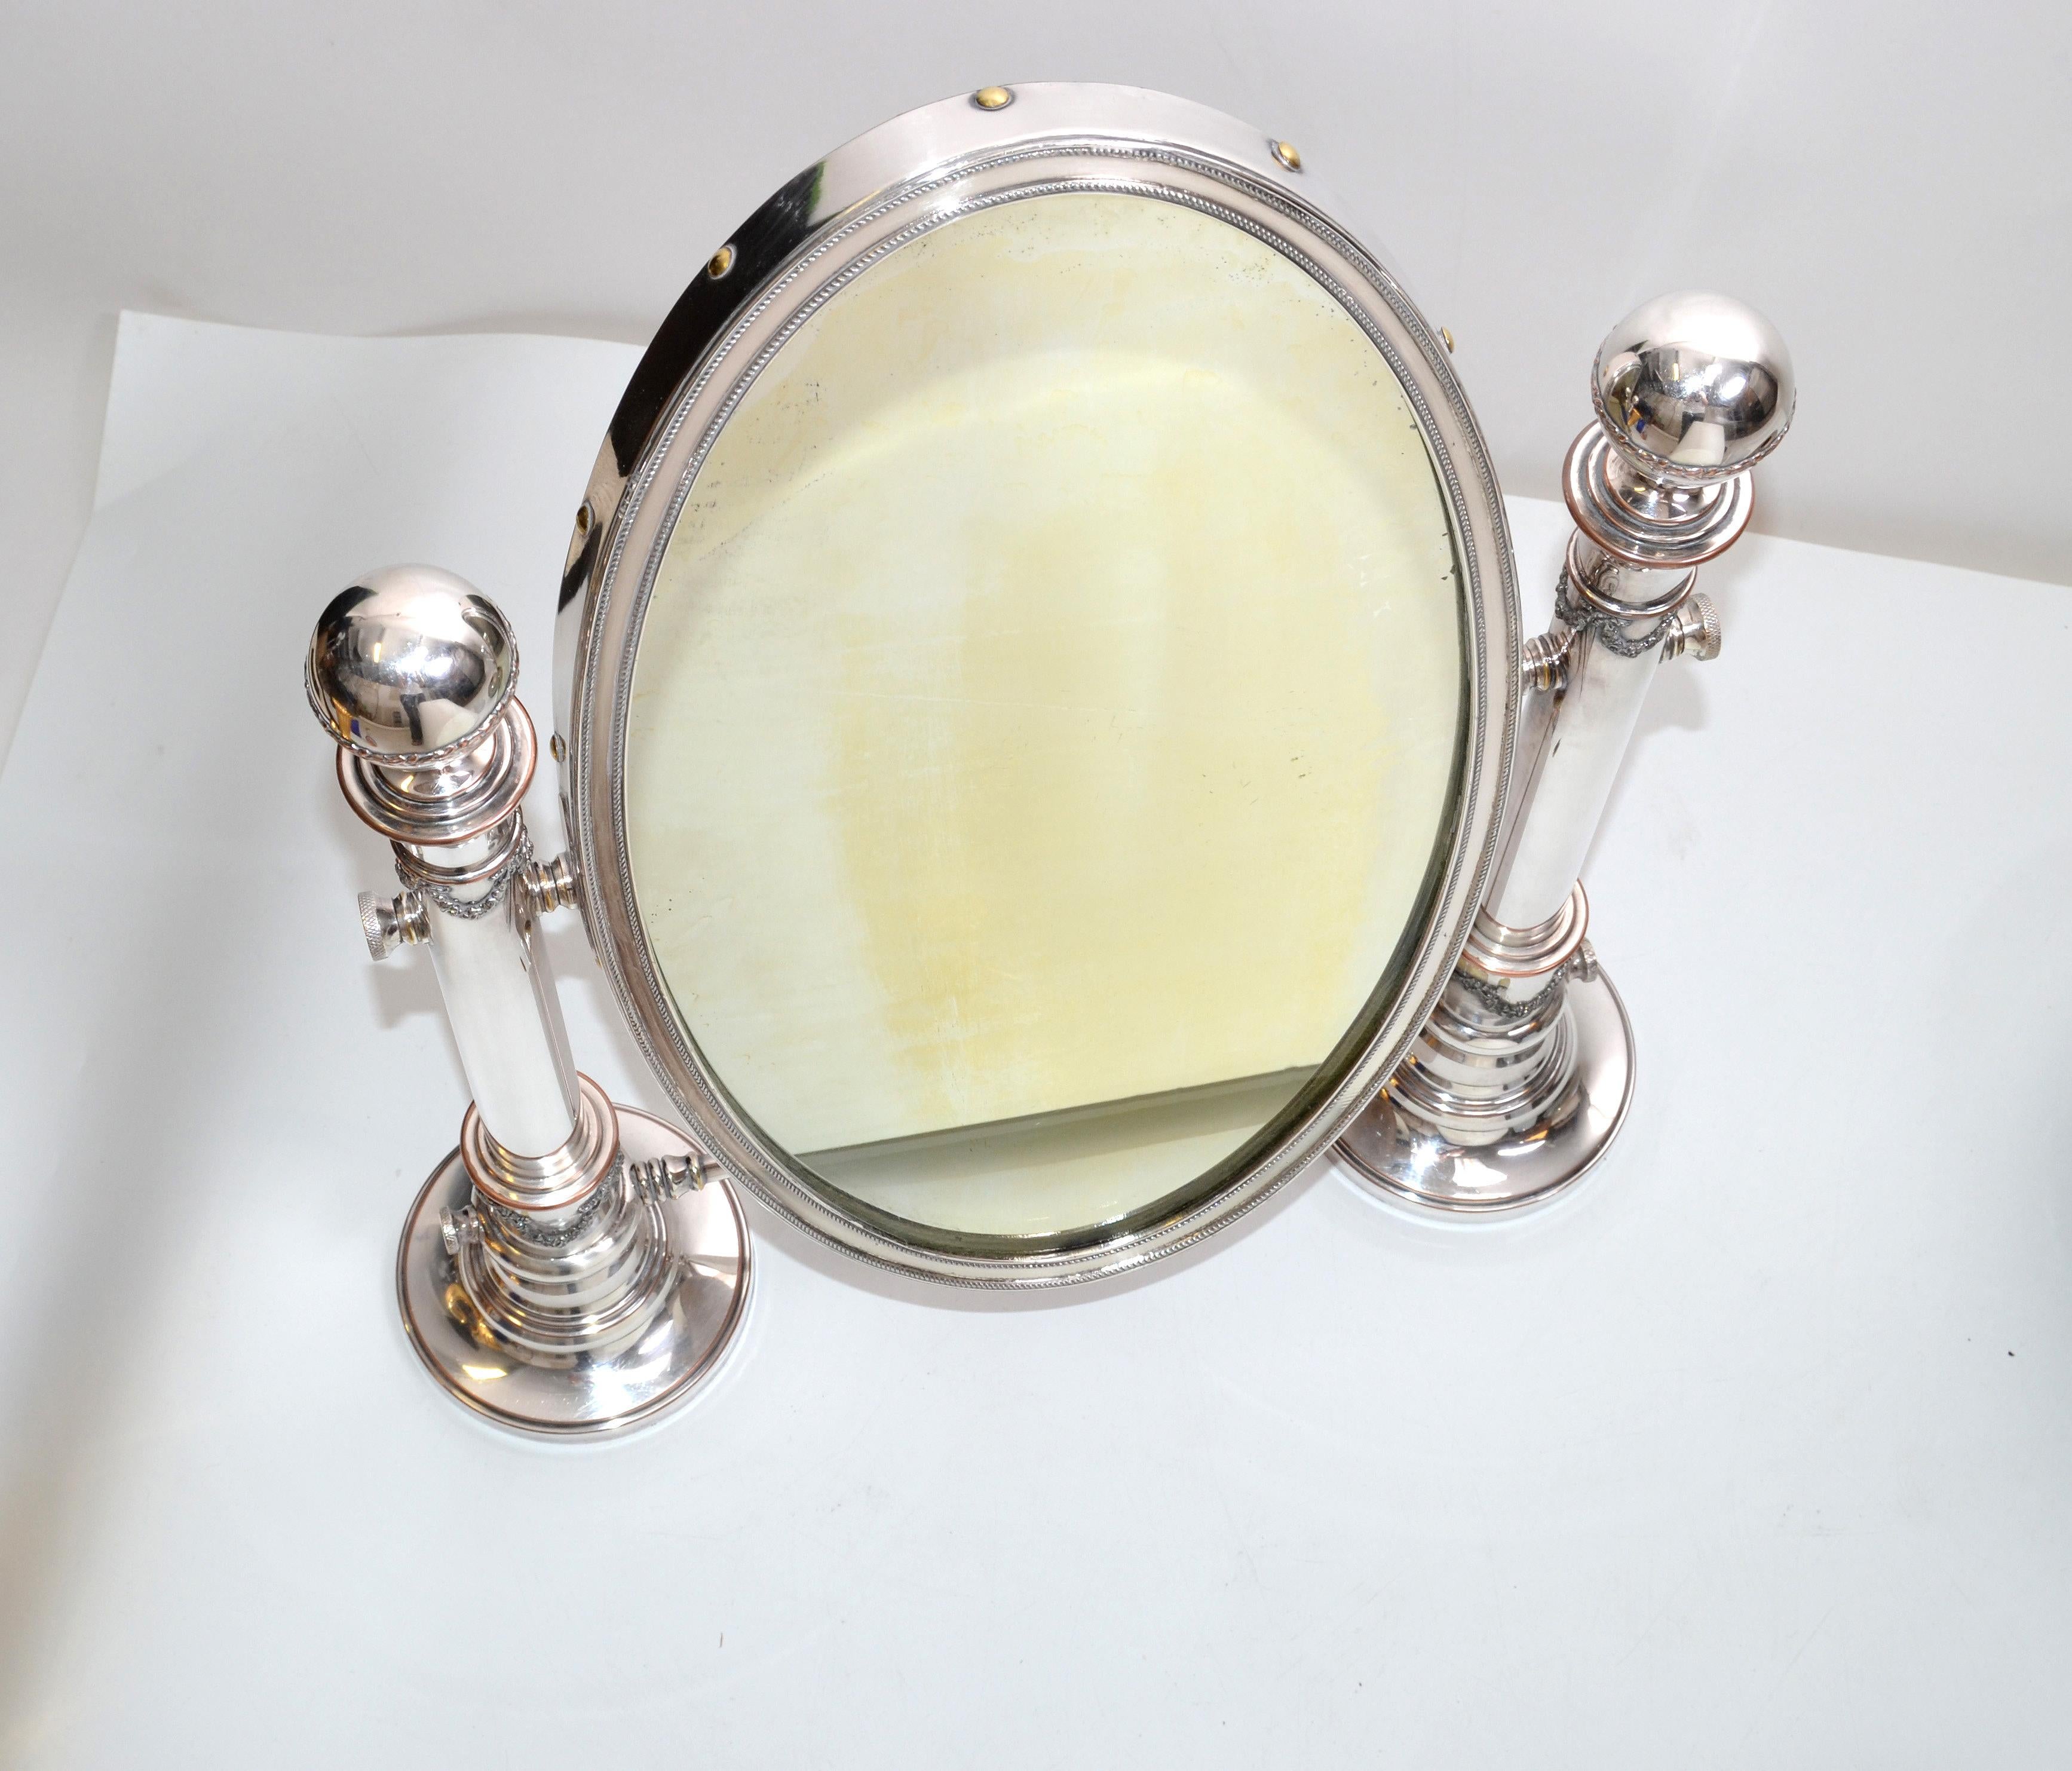 British Colonial Antique 1910 Sheffield England Oval Vanity Mirror Pedestal For Sale 2